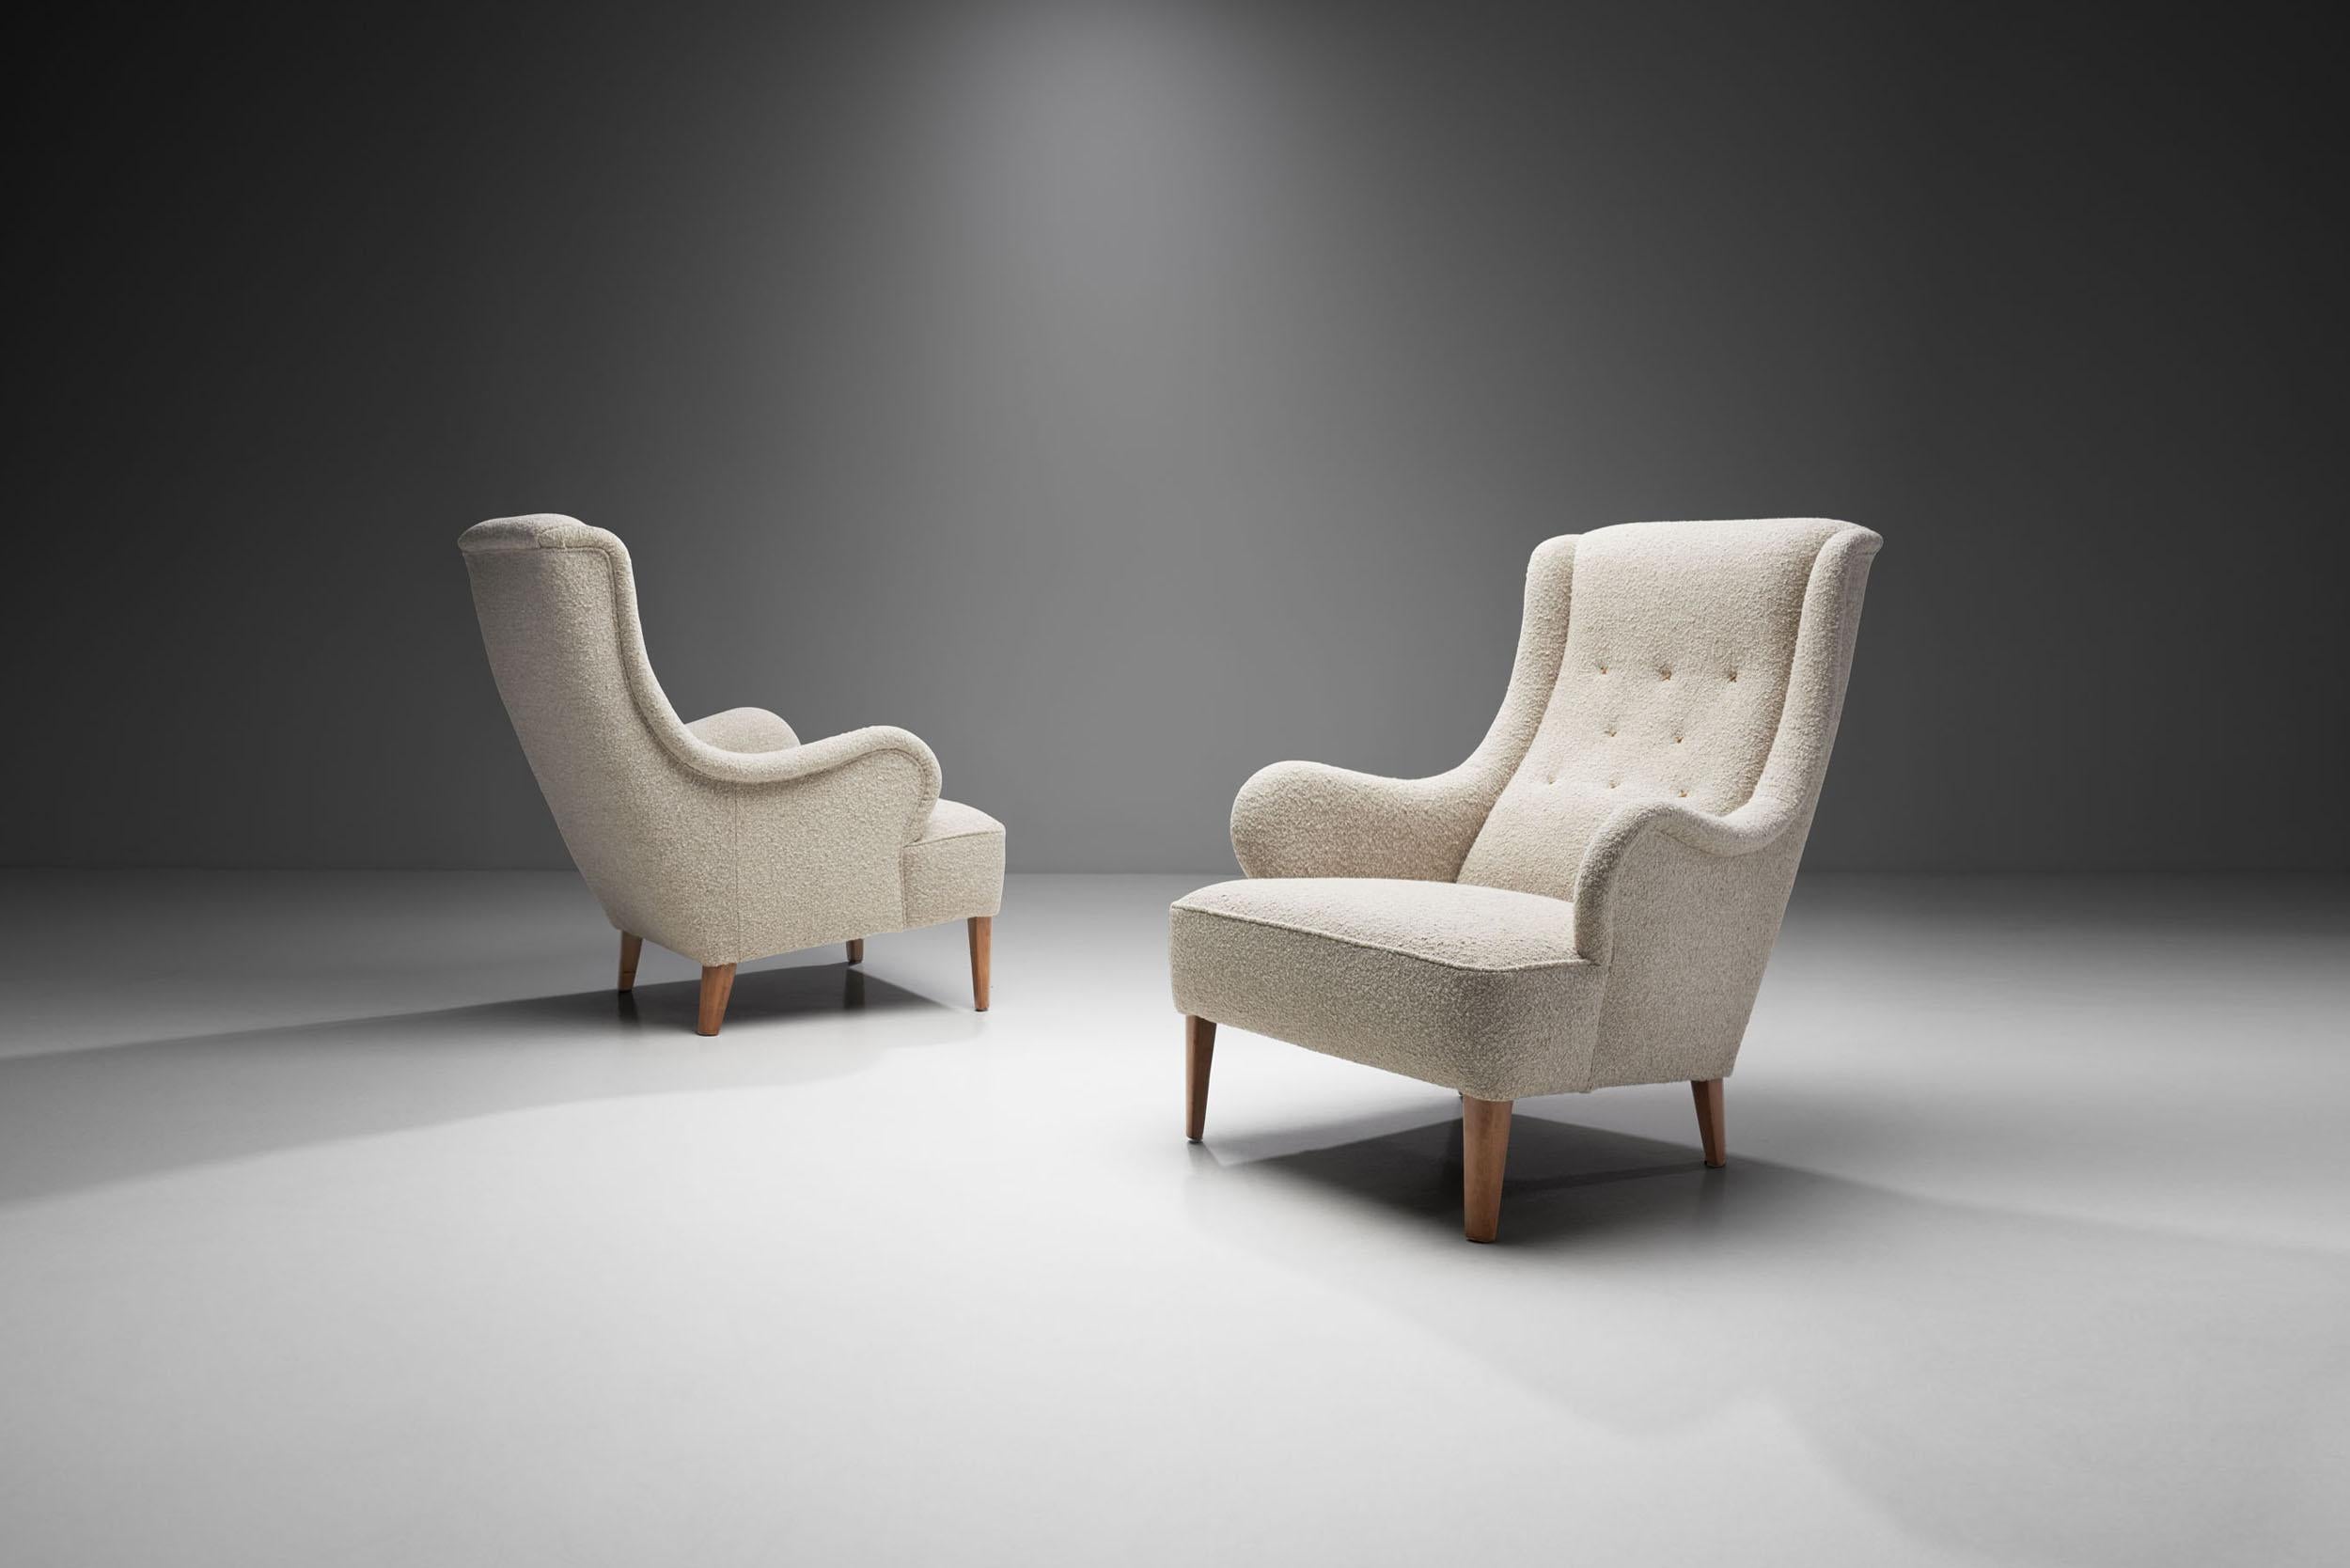 The Oskar armchair was designed in 1939, the same year that Carl Malmsten participated in the New York World Fair. It was there that the expression “Swedish Modern” was launched, but Malmsten remained a traditionalist, mainly concerned with comfort